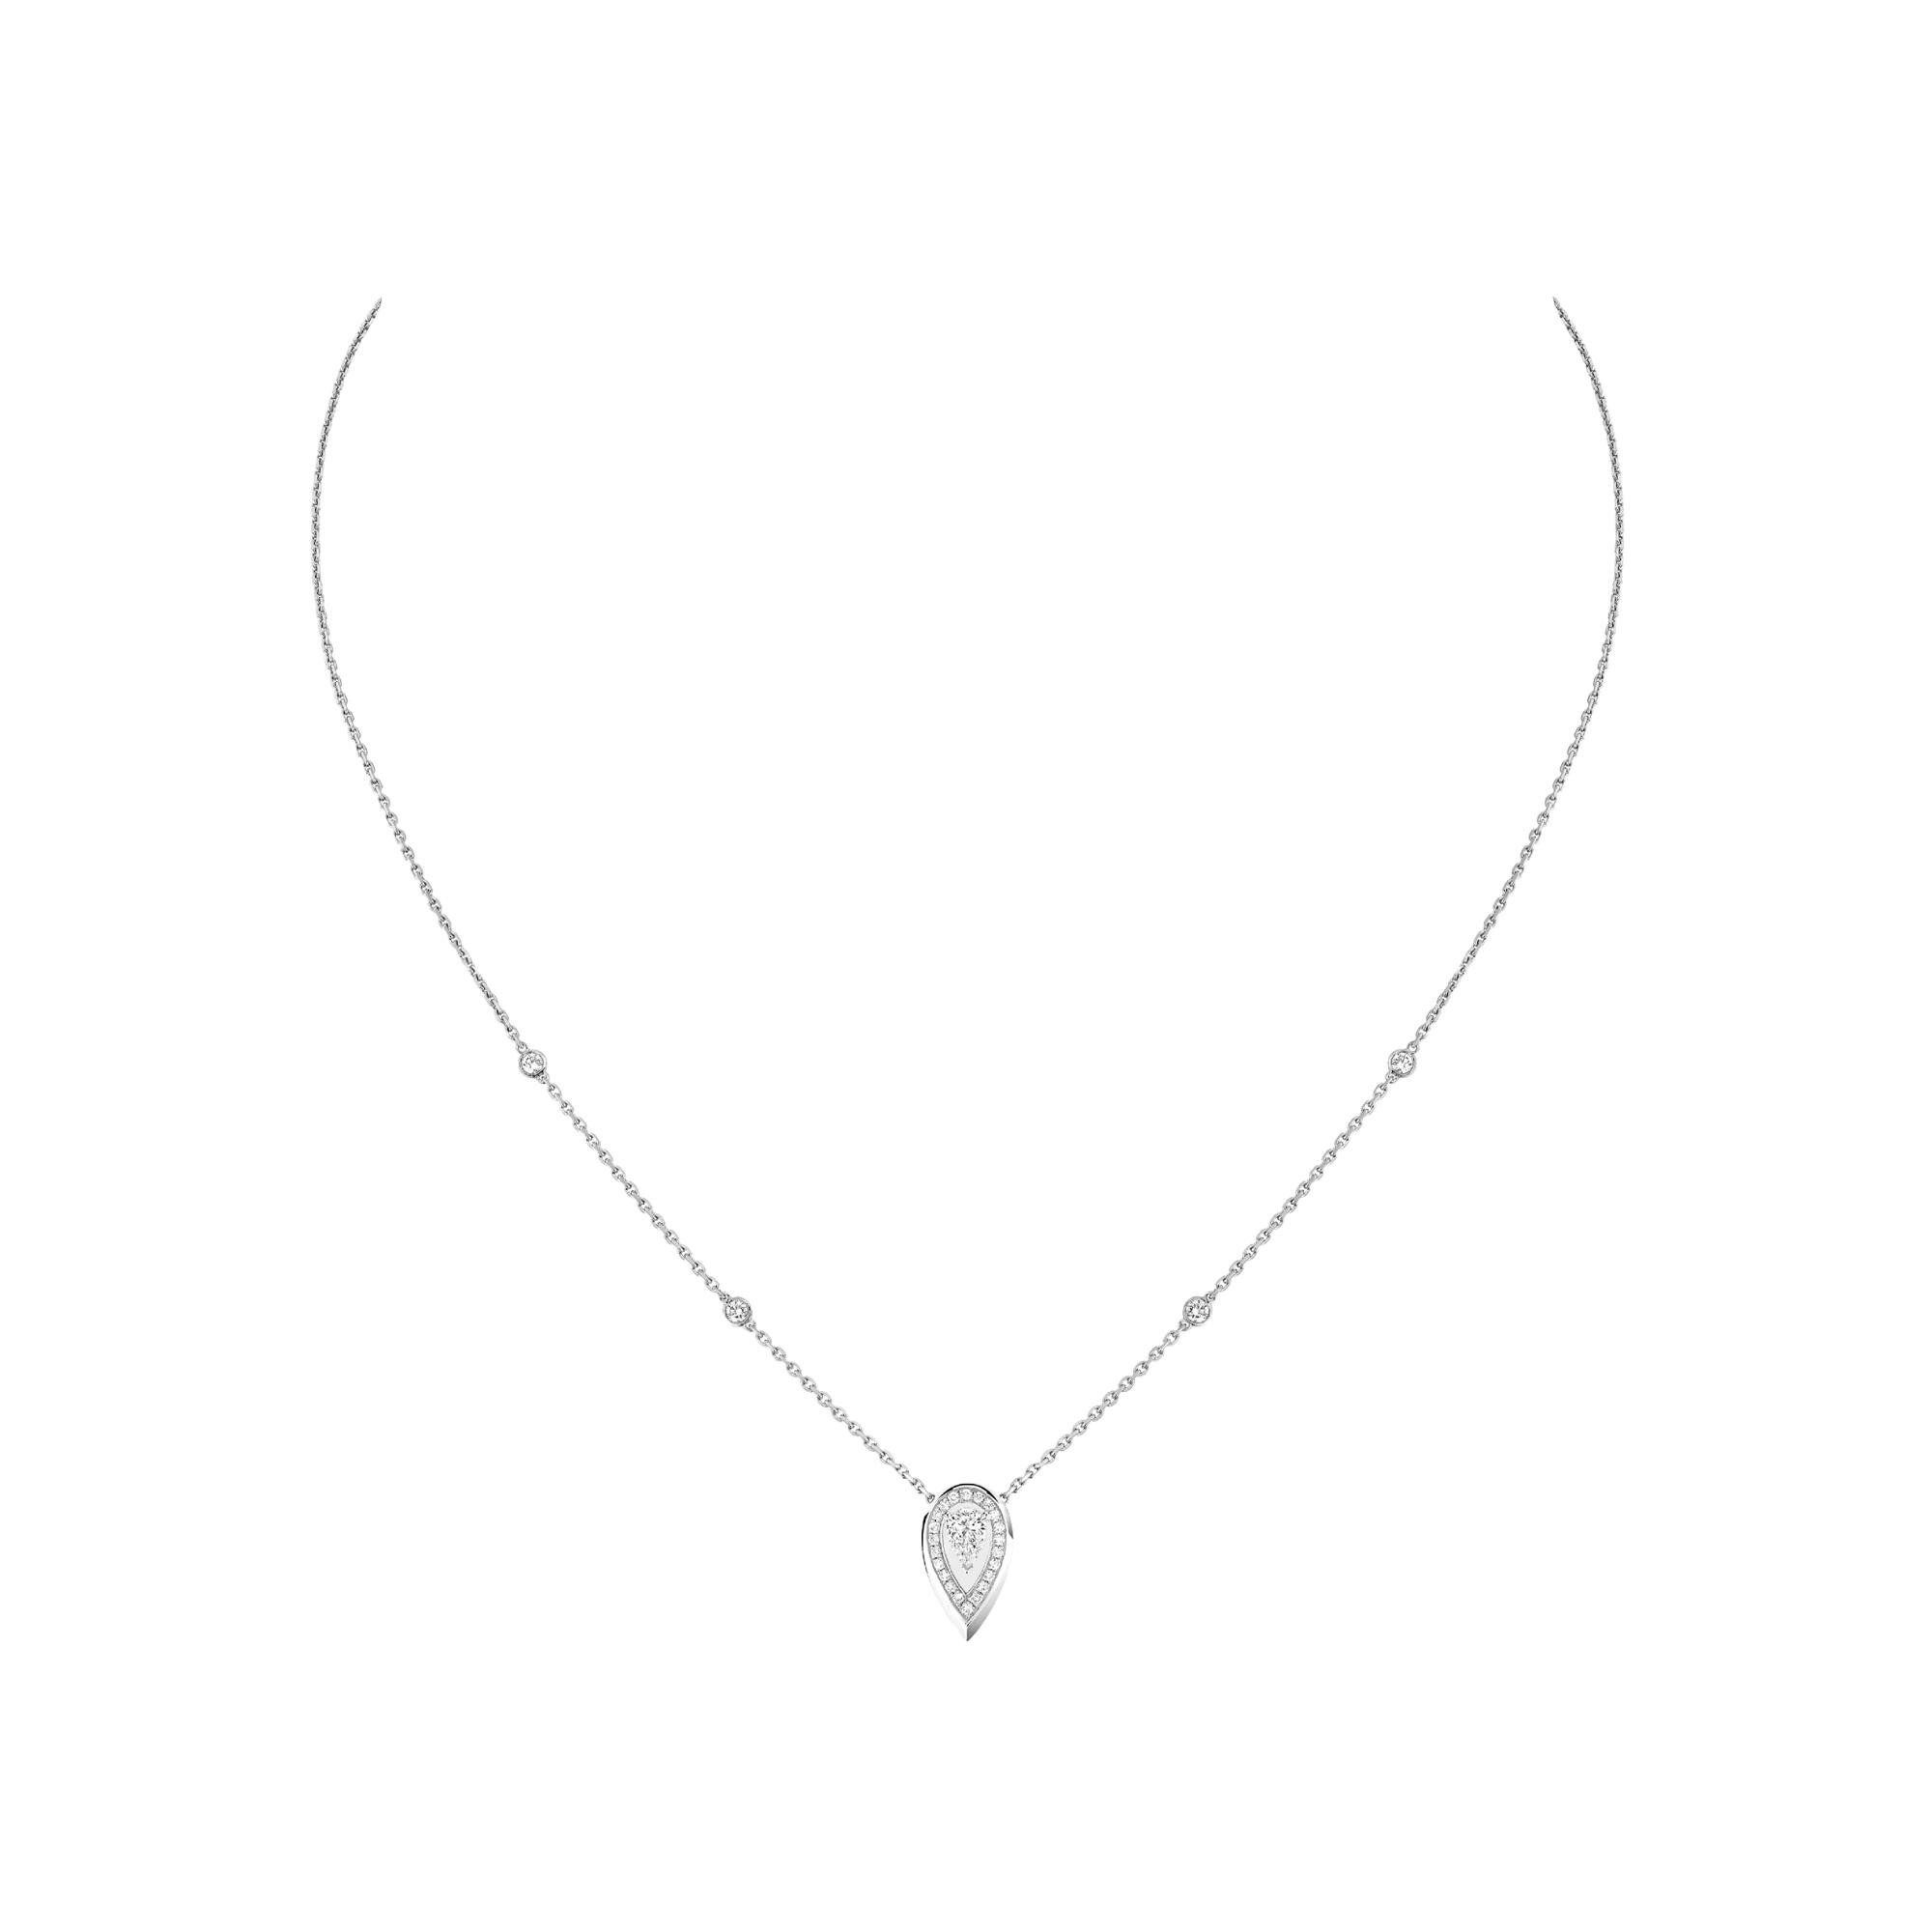 Collier femme or blanc diamant fiery 0,10ct